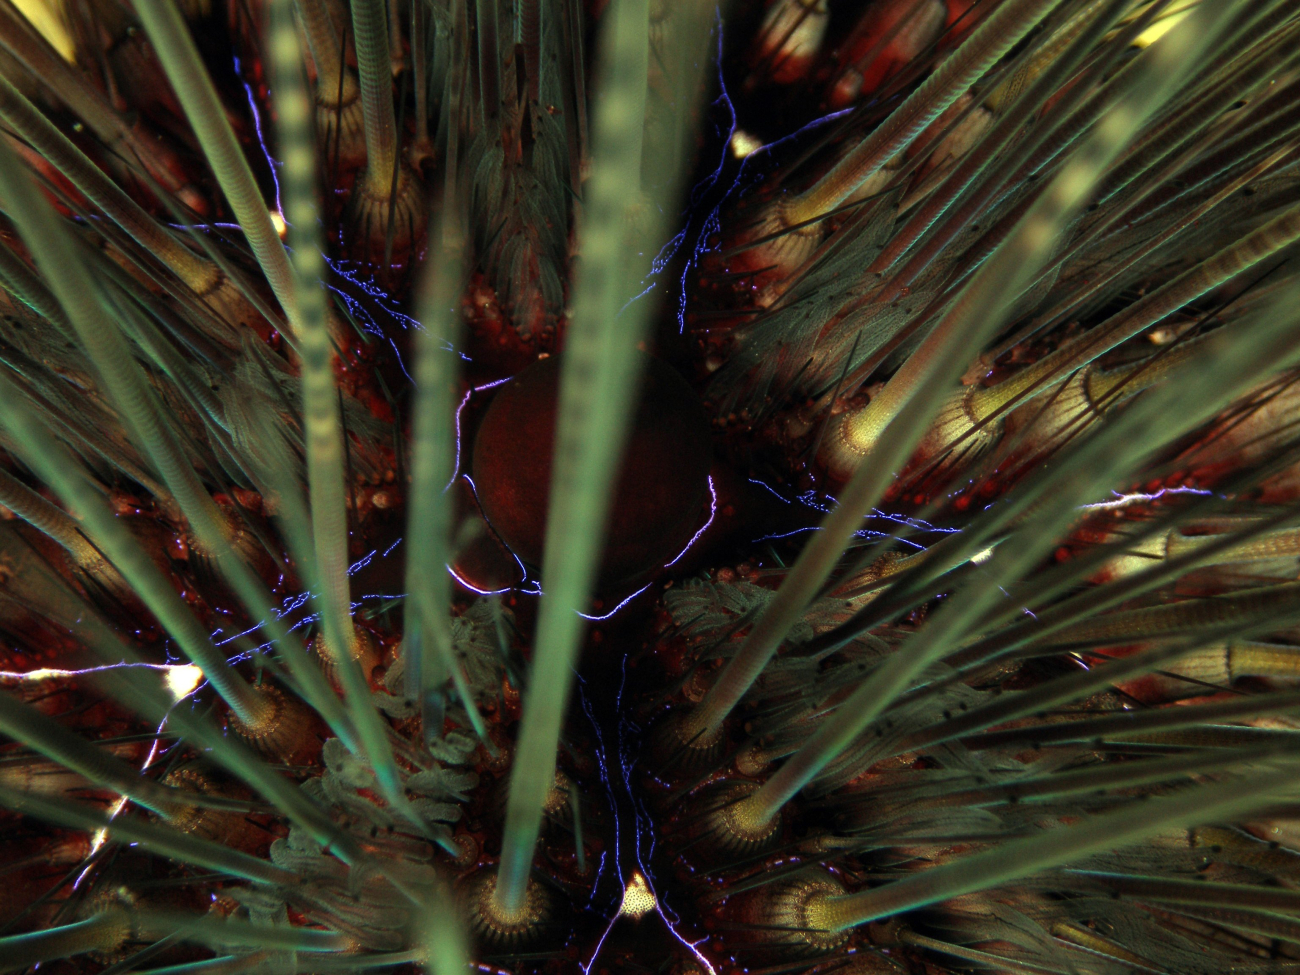 A close-up view of a long-spined sea urchin (Diadema sp